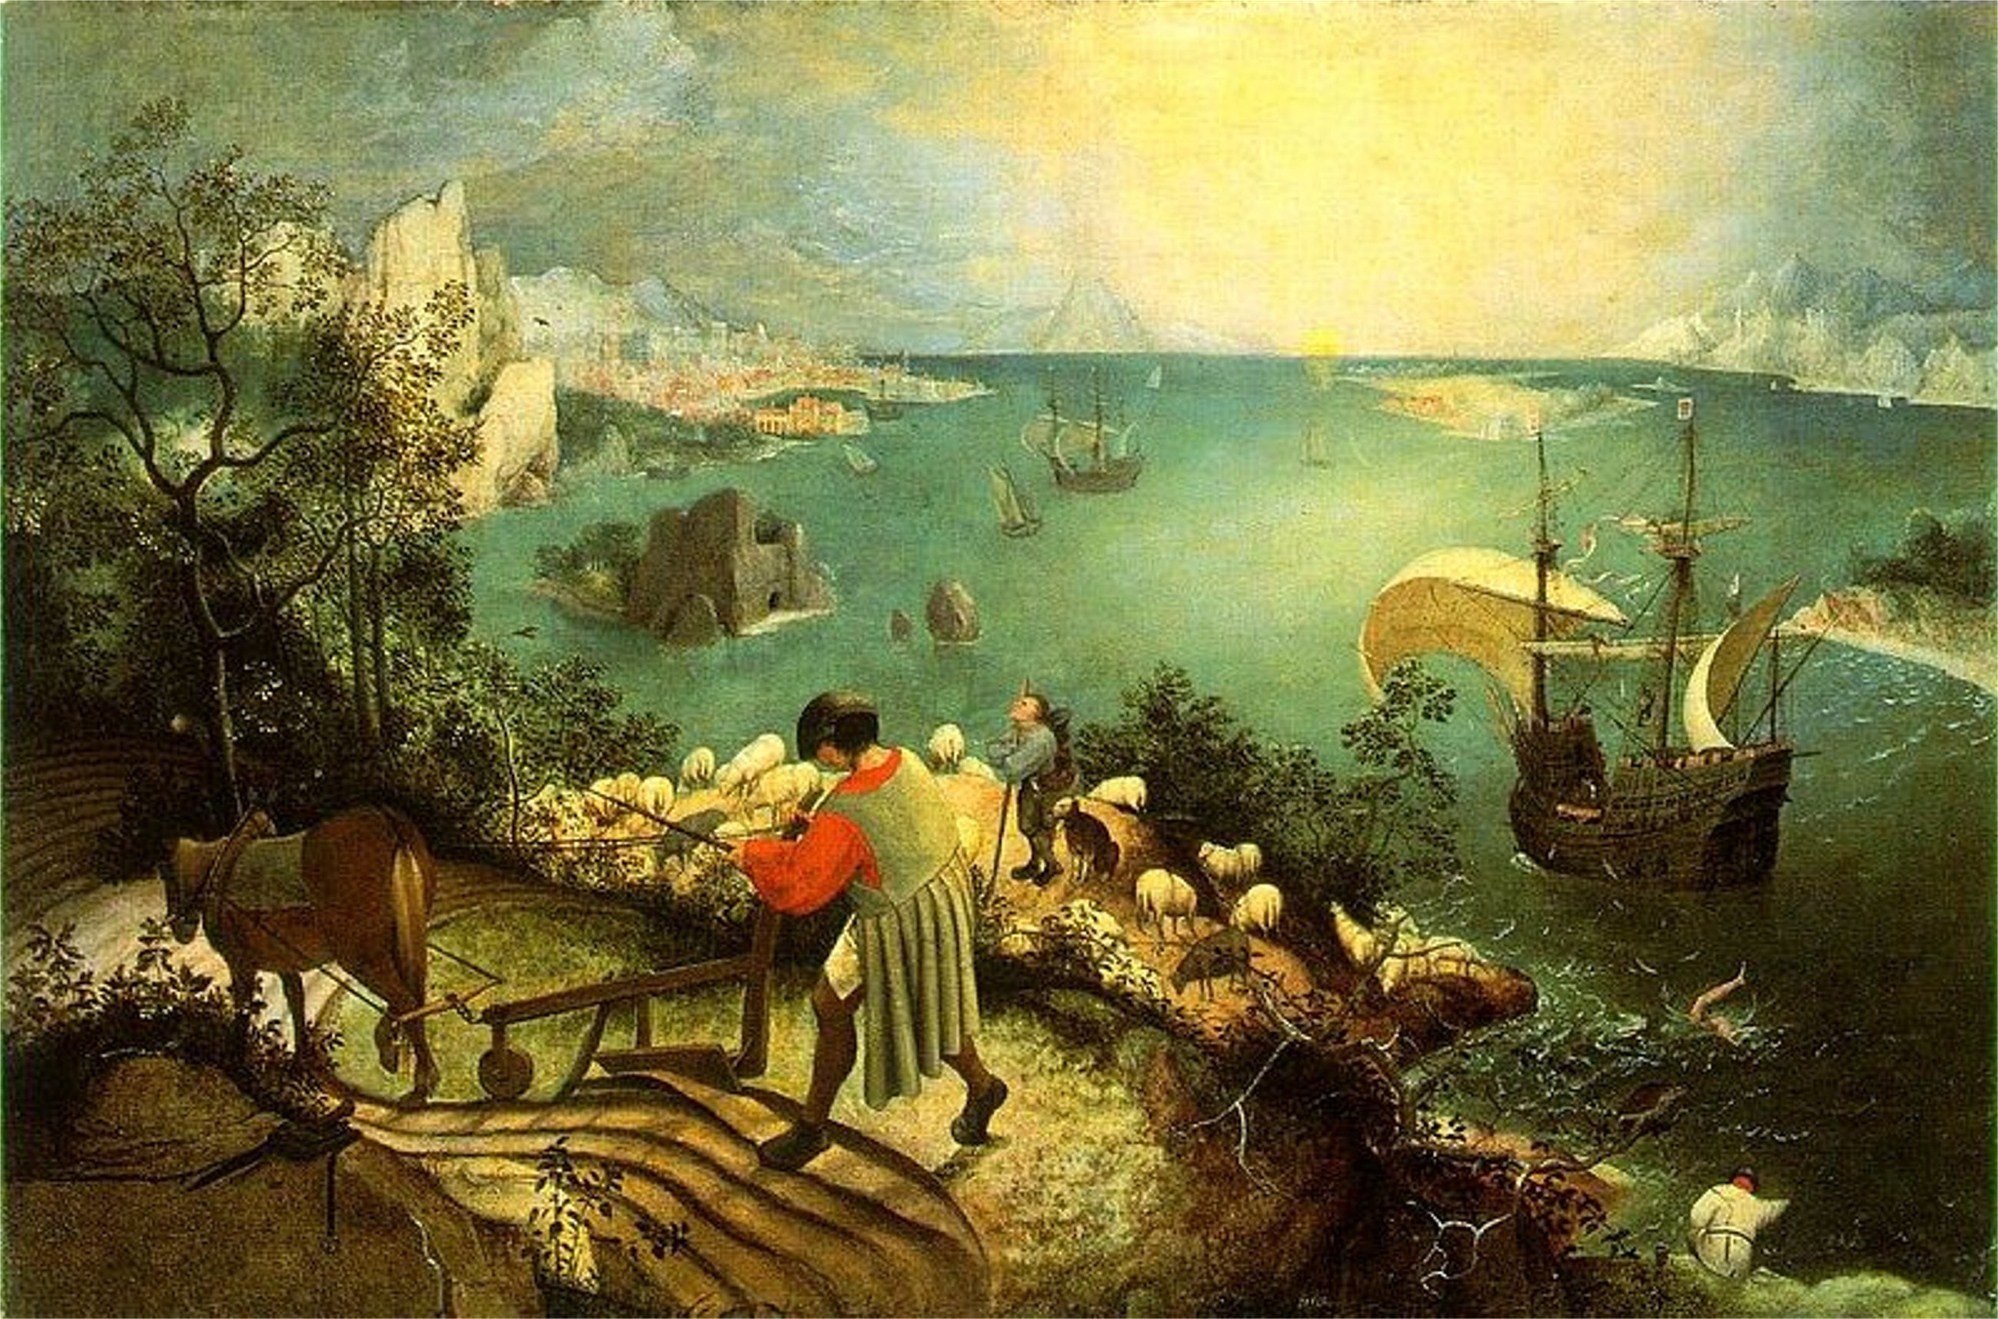 Landscape With the Fall of Icarus | Tom Reeder's Blog